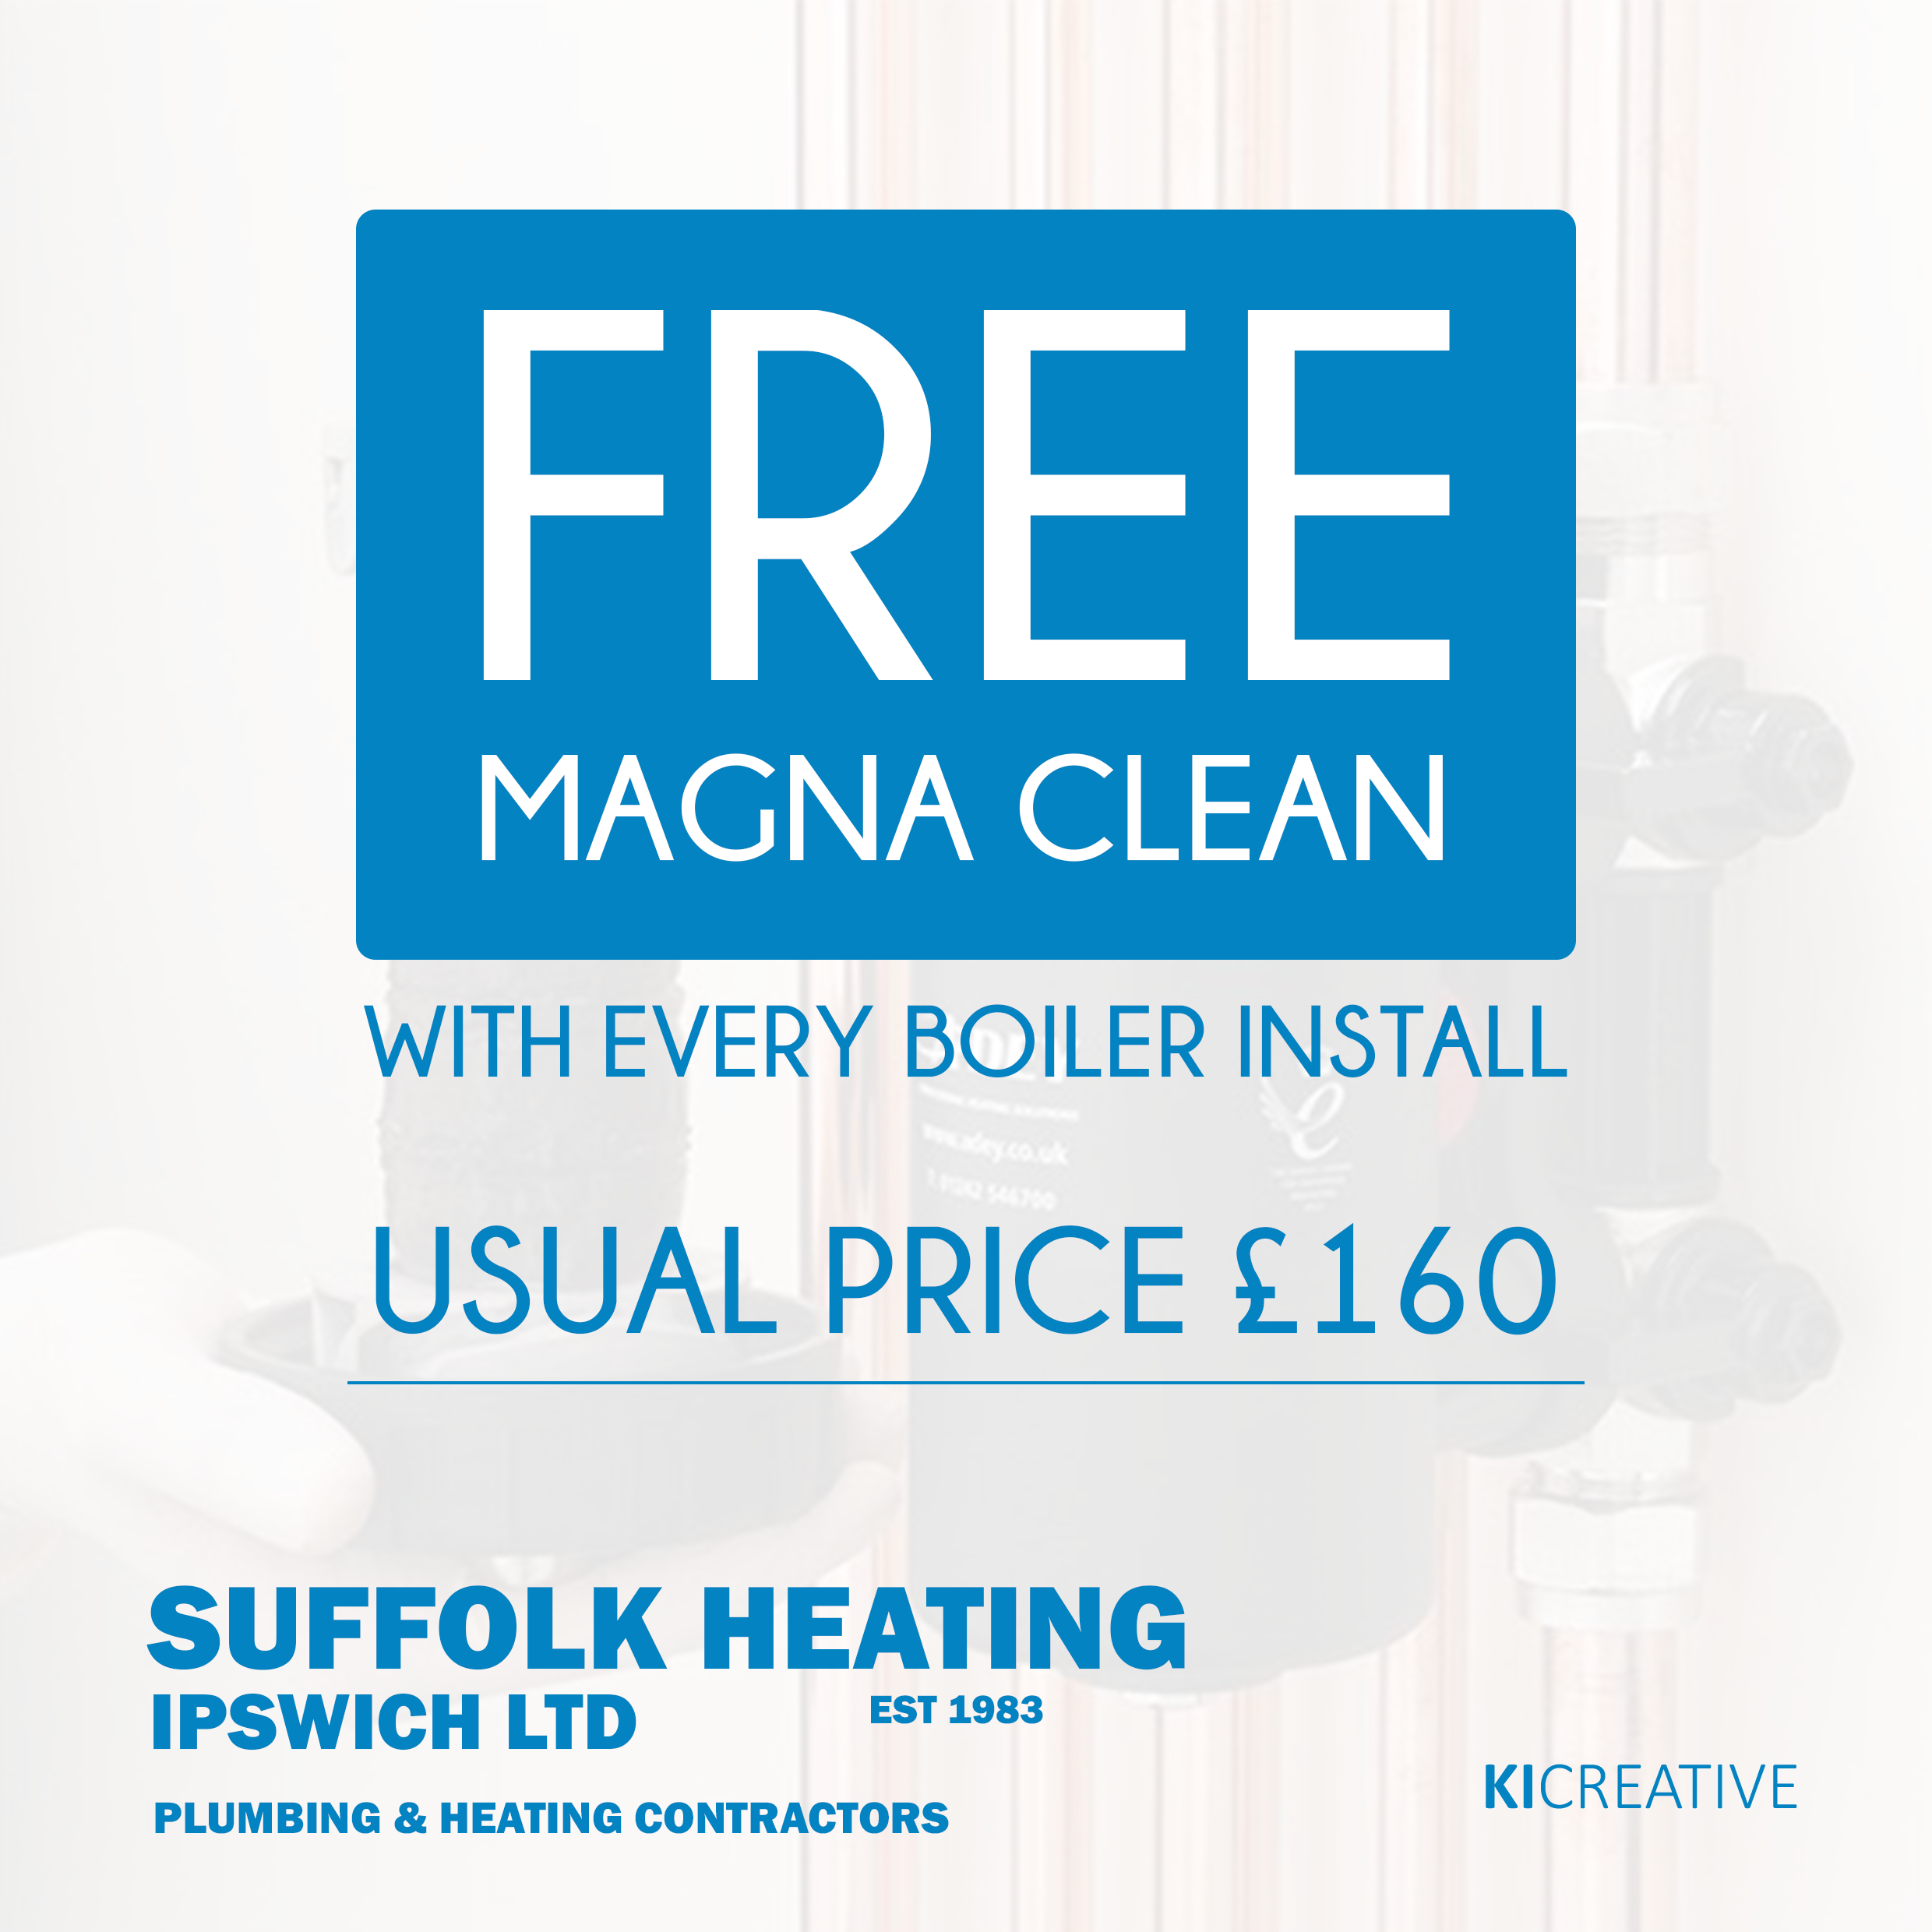 Free Magna Clean Plumbers Ipswich